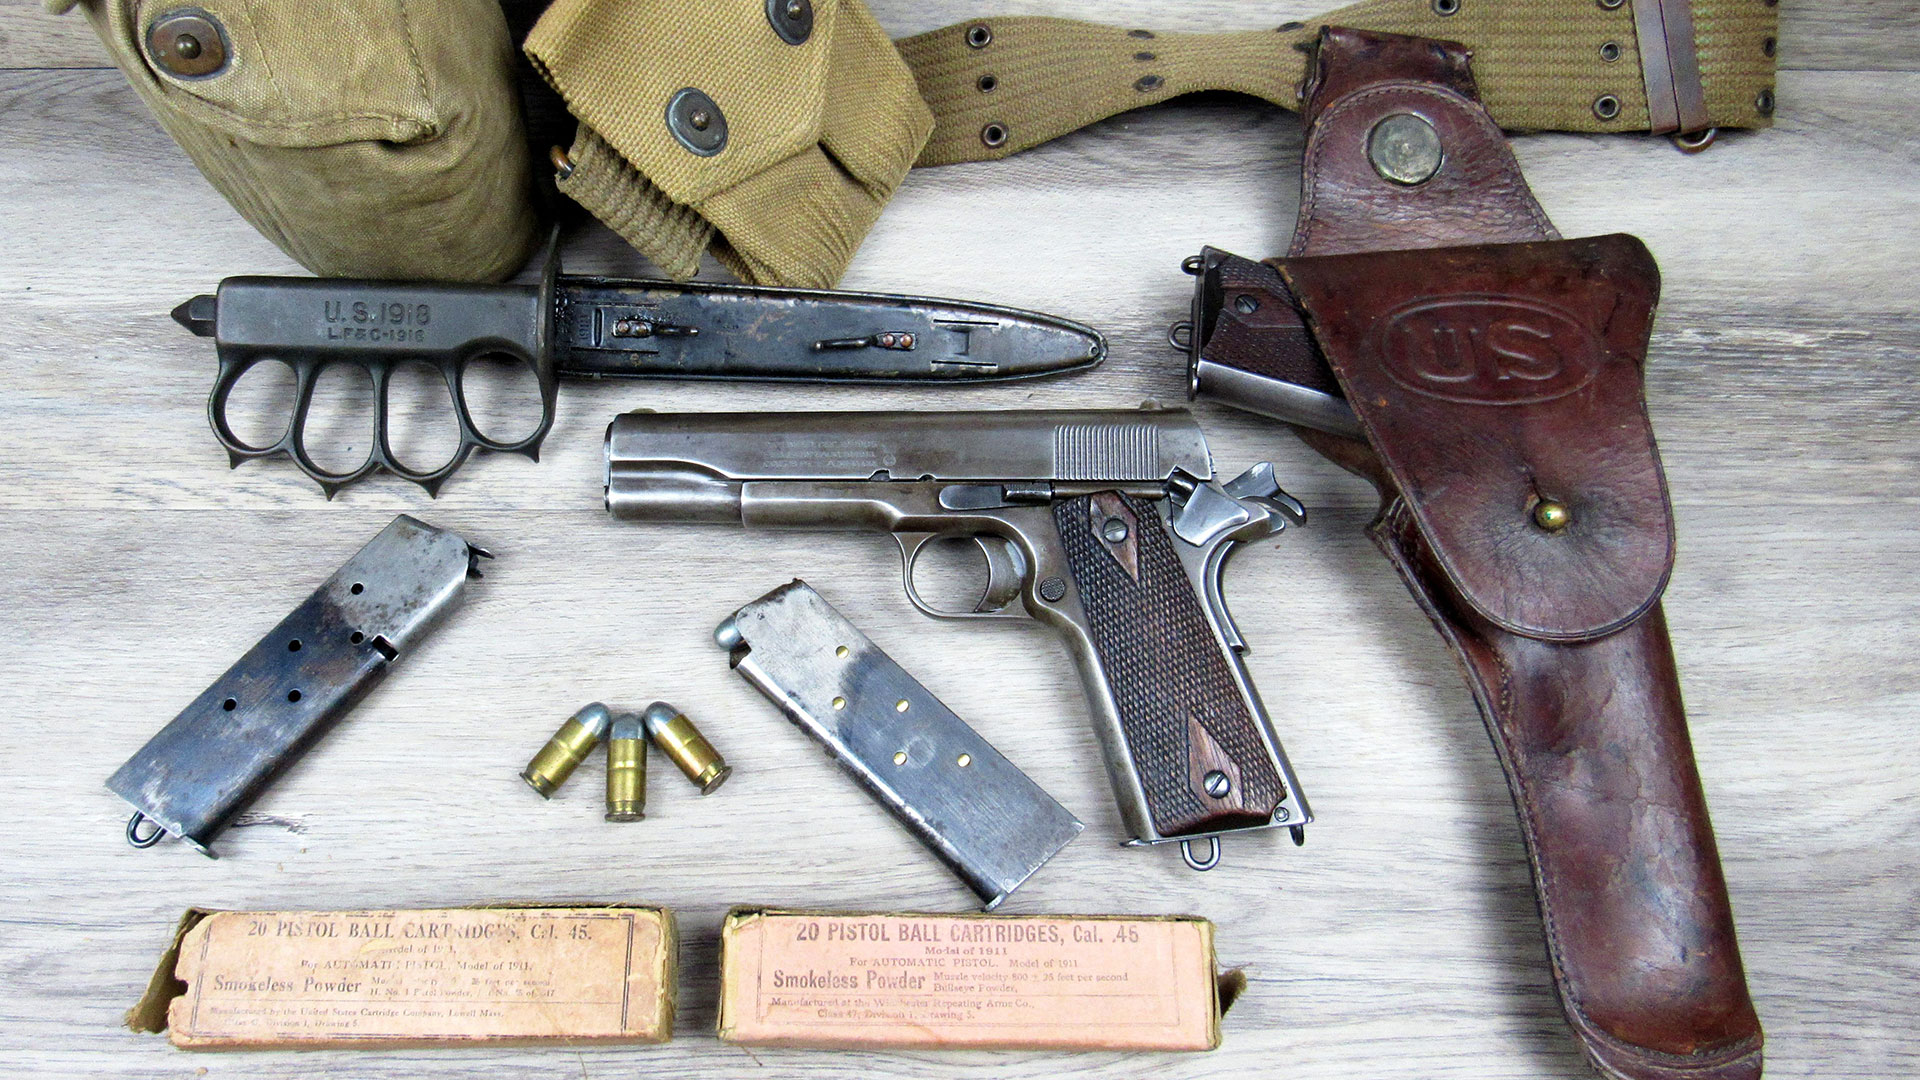 WW1 German Cartridge Case Markings - Arms and other weapons - The Great War  (1914-1918) Forum